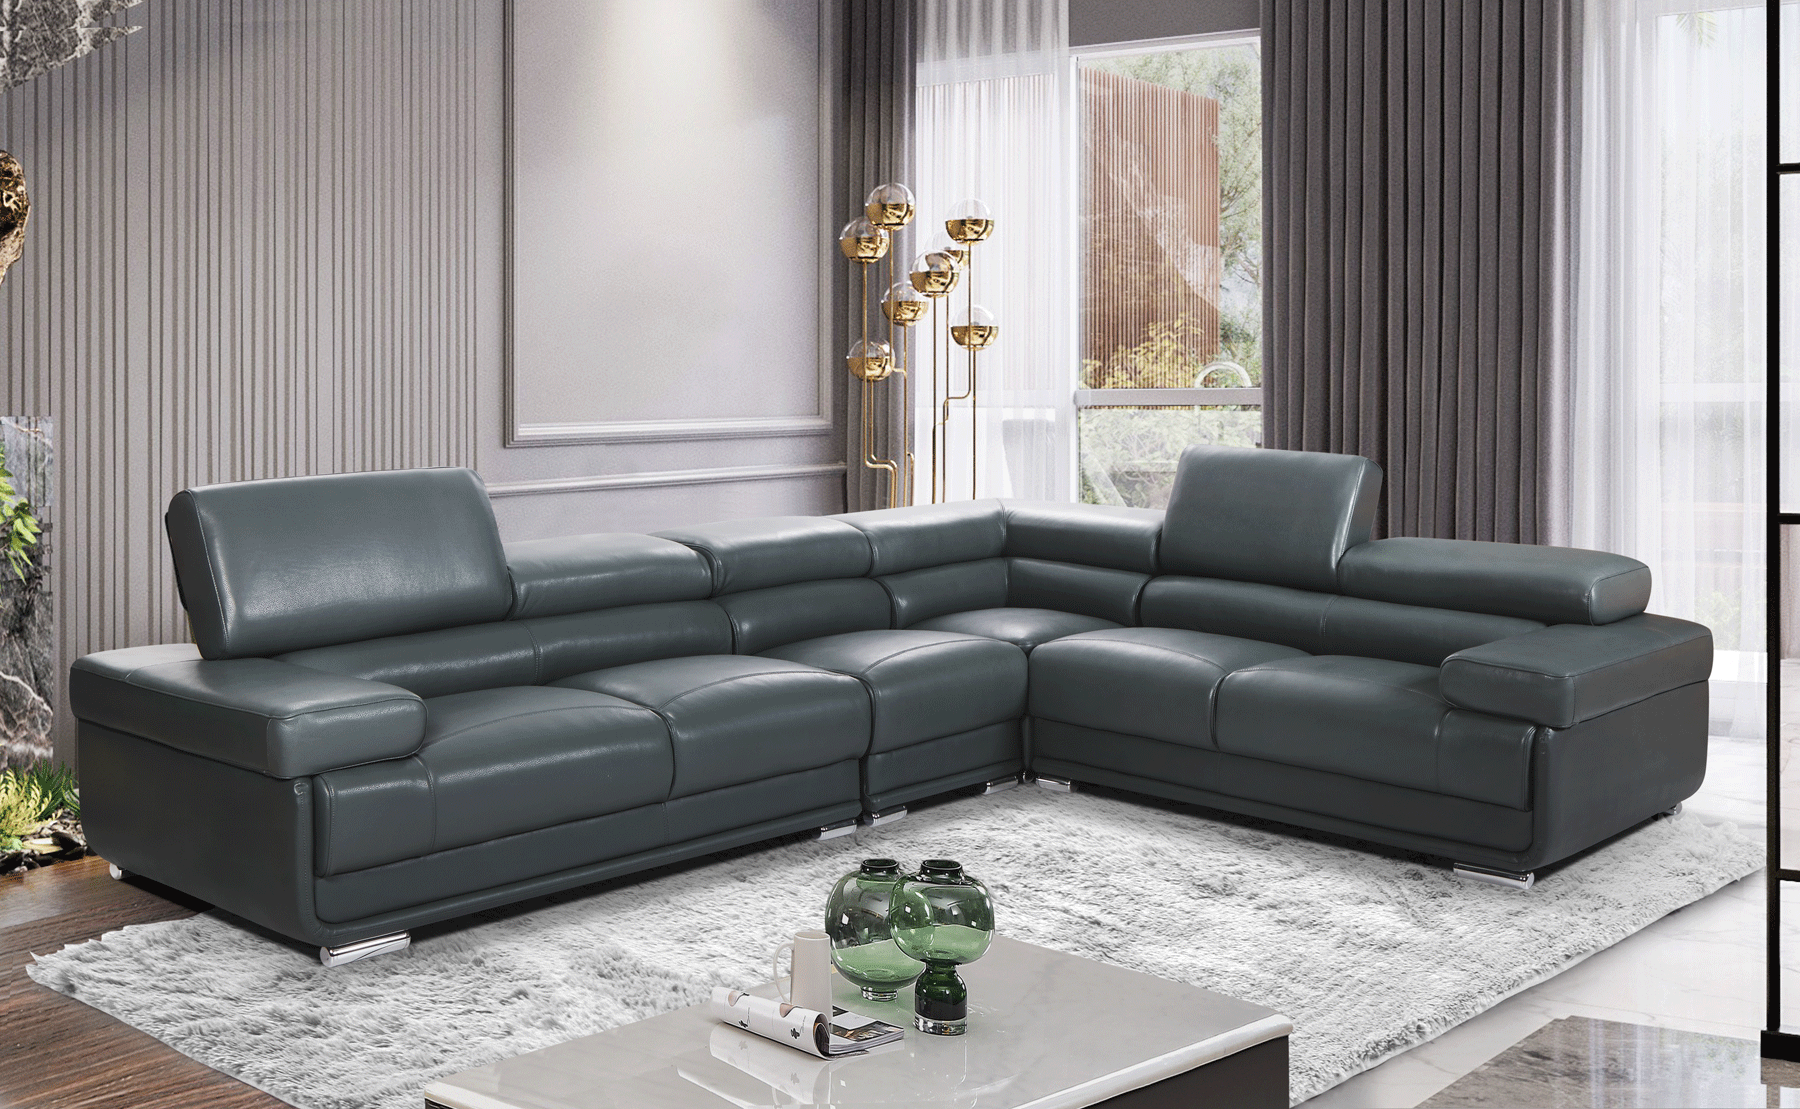 Brands Status Modern Collections, Italy 2119 Sectional Dark Grey